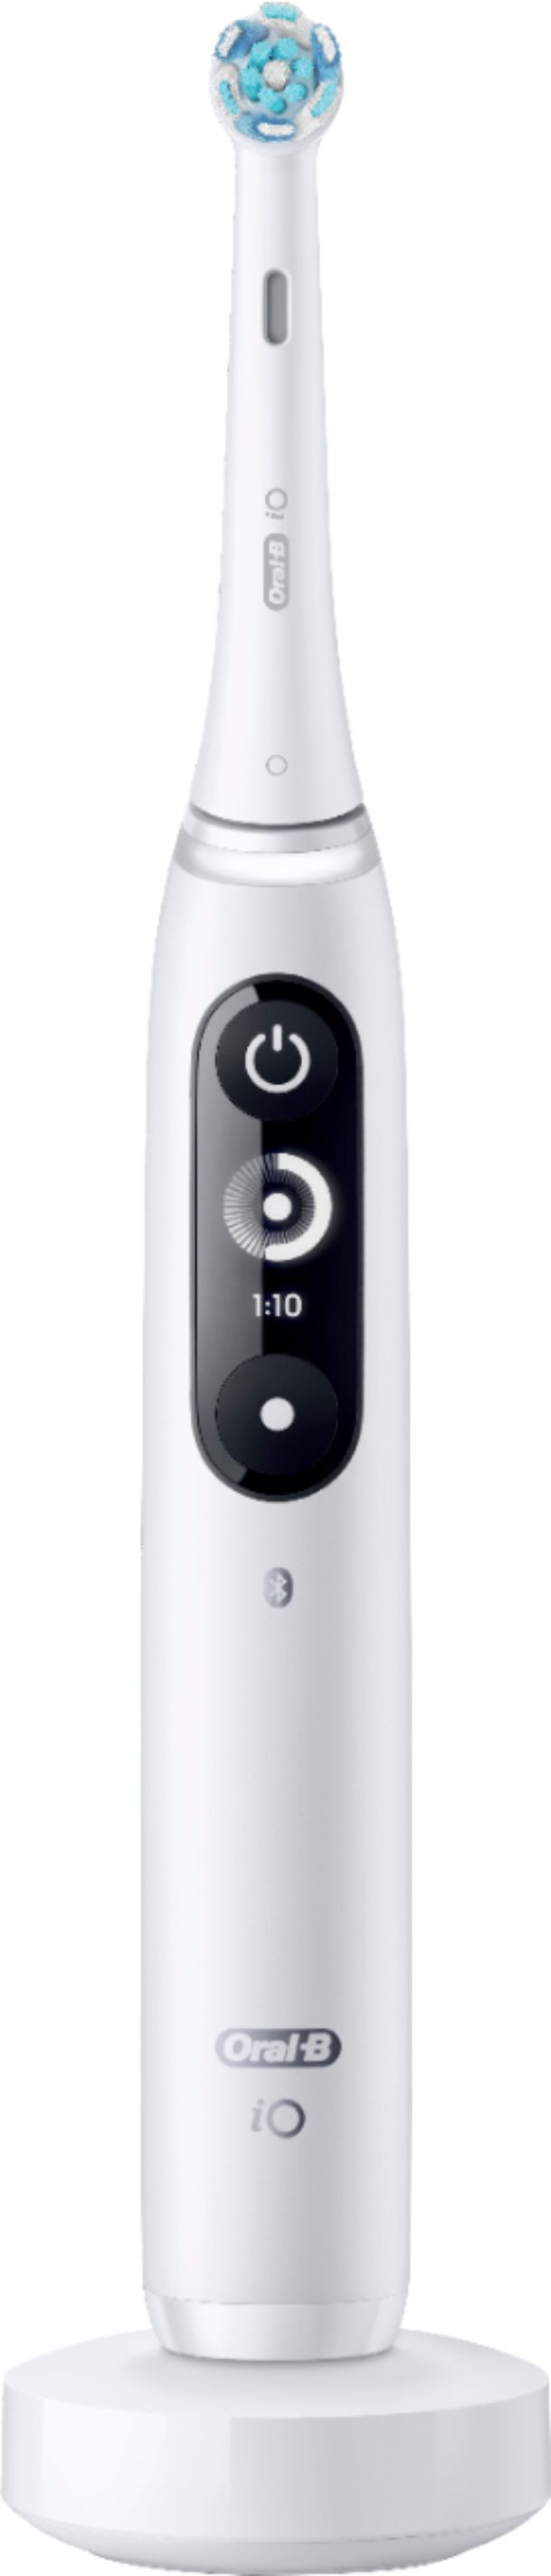 Oral-B iO Series 7 Connected Rechargeable Electric Toothbrush White  Alabaster IO7 M7.2A1.1B WT - Best Buy